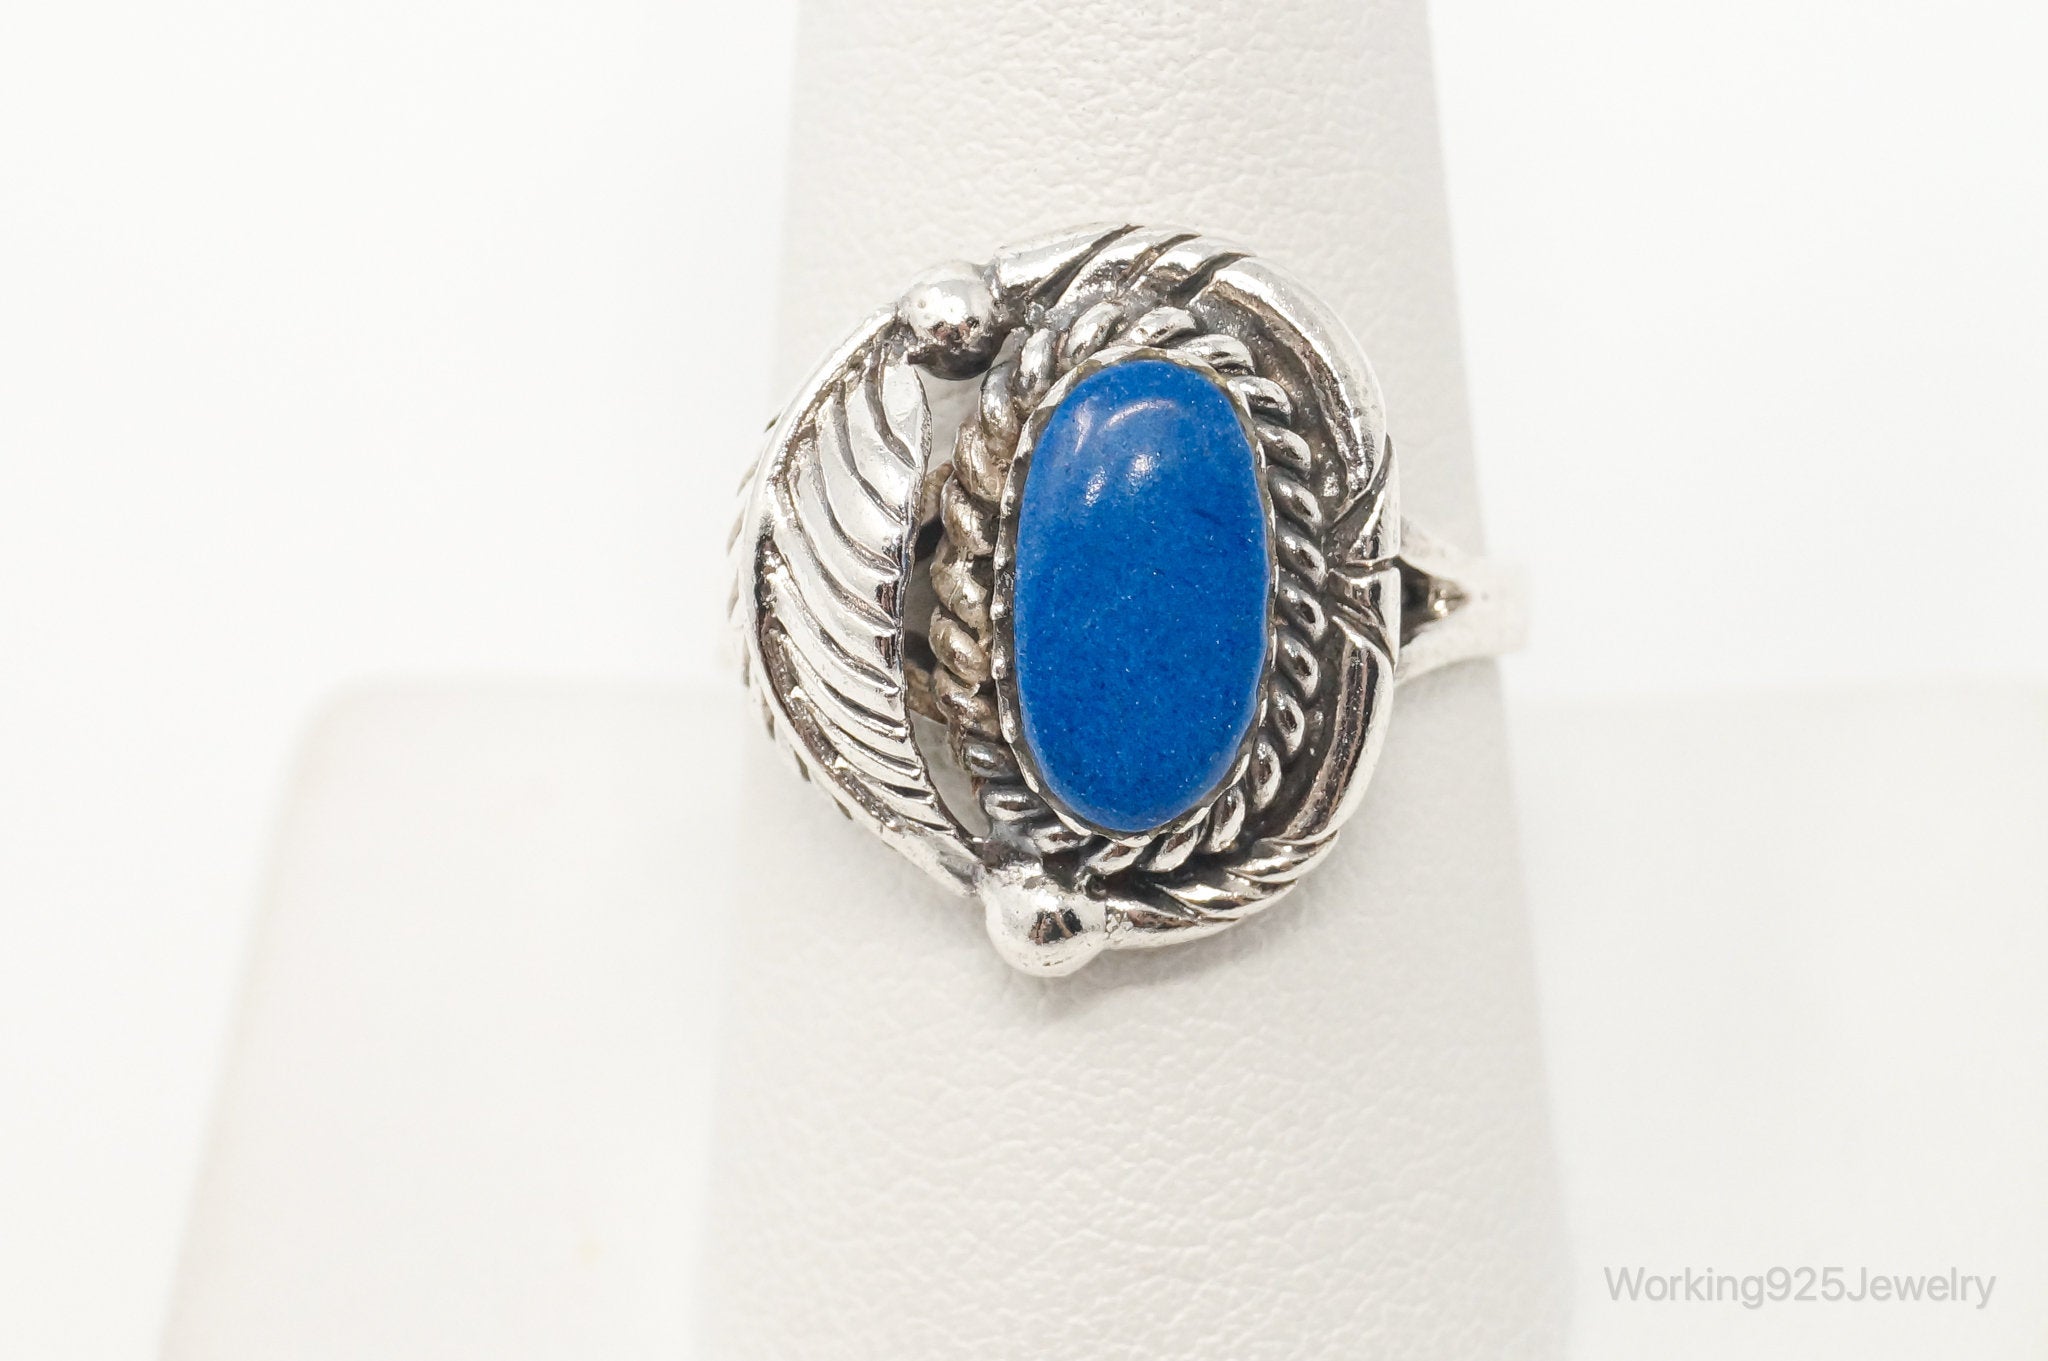 Vintage Native American Unsigned Lapis Lazuli Sterling Silver Ring - Sz 8.75